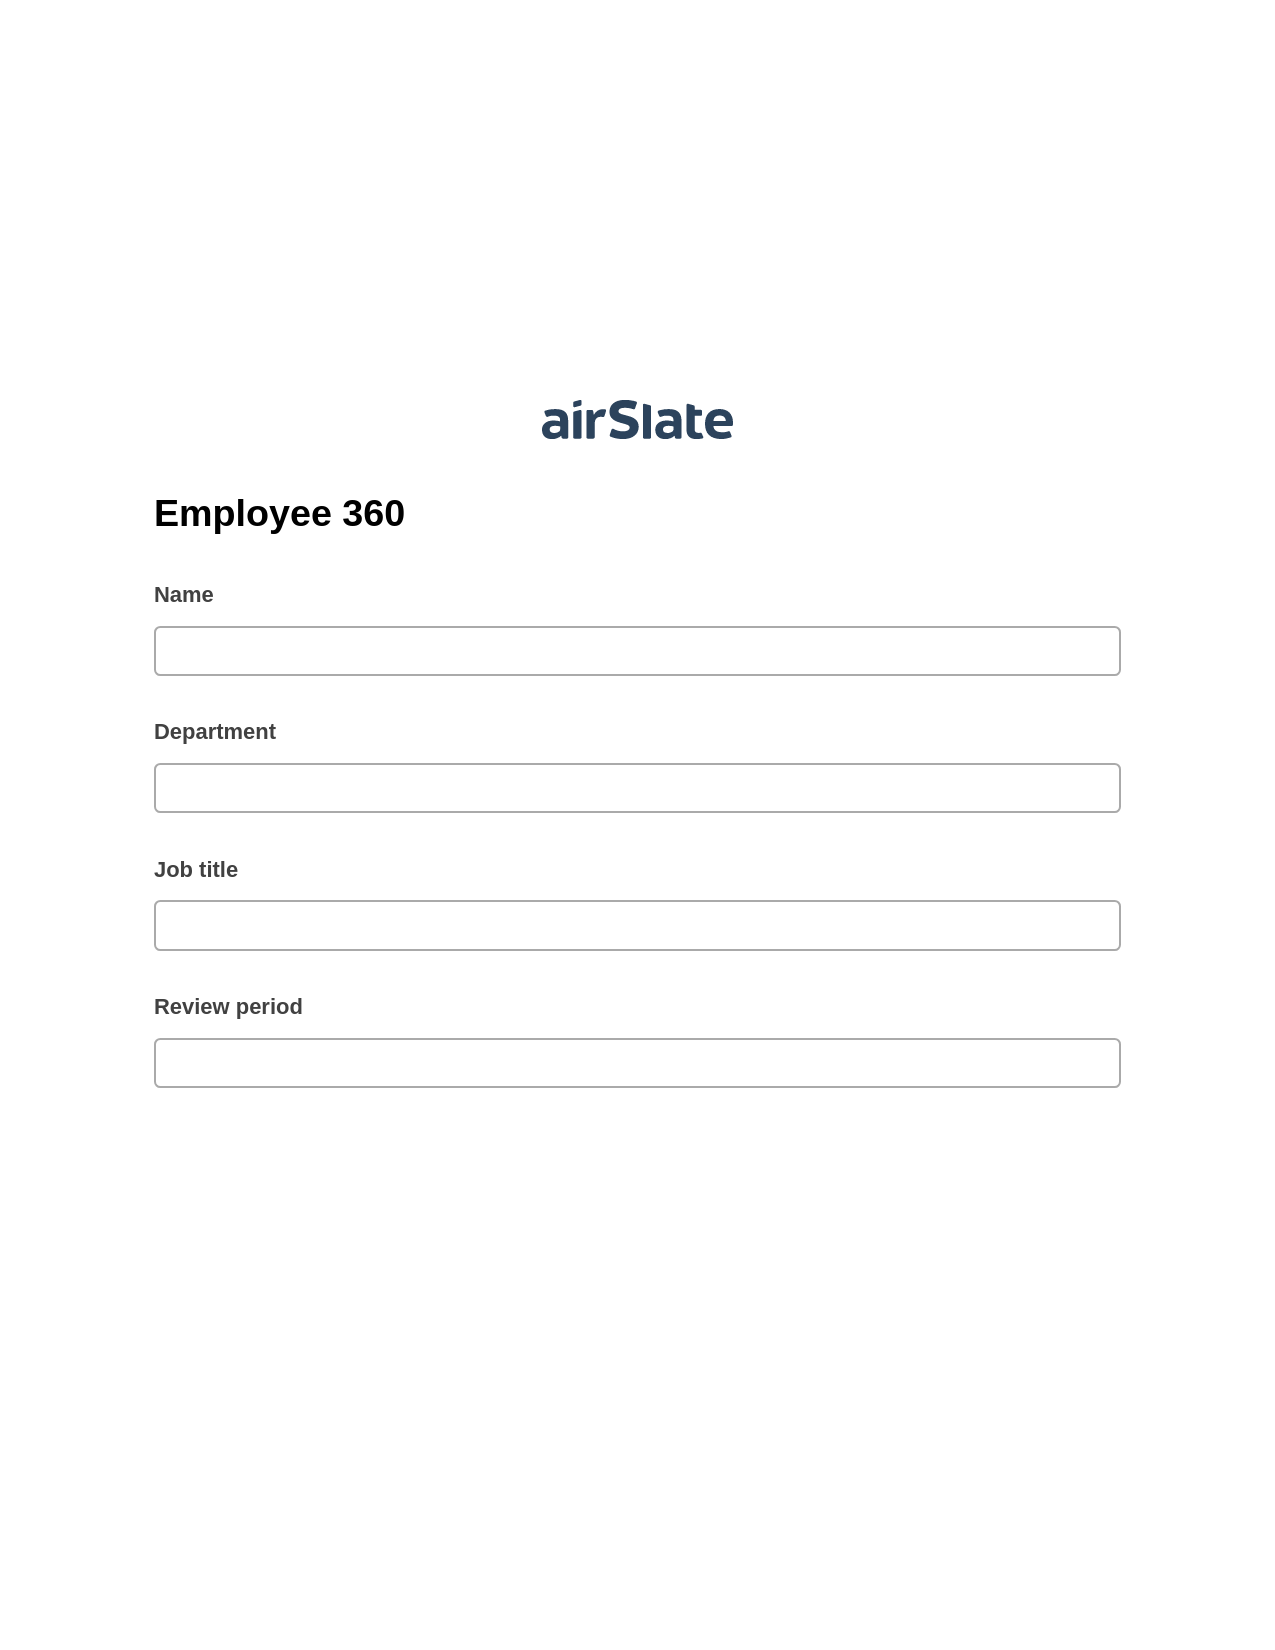 Multirole Employee 360 Pre-fill from CSV File Bot, Export to MS Dynamics 365 Bot, Export to Google Sheet Bot